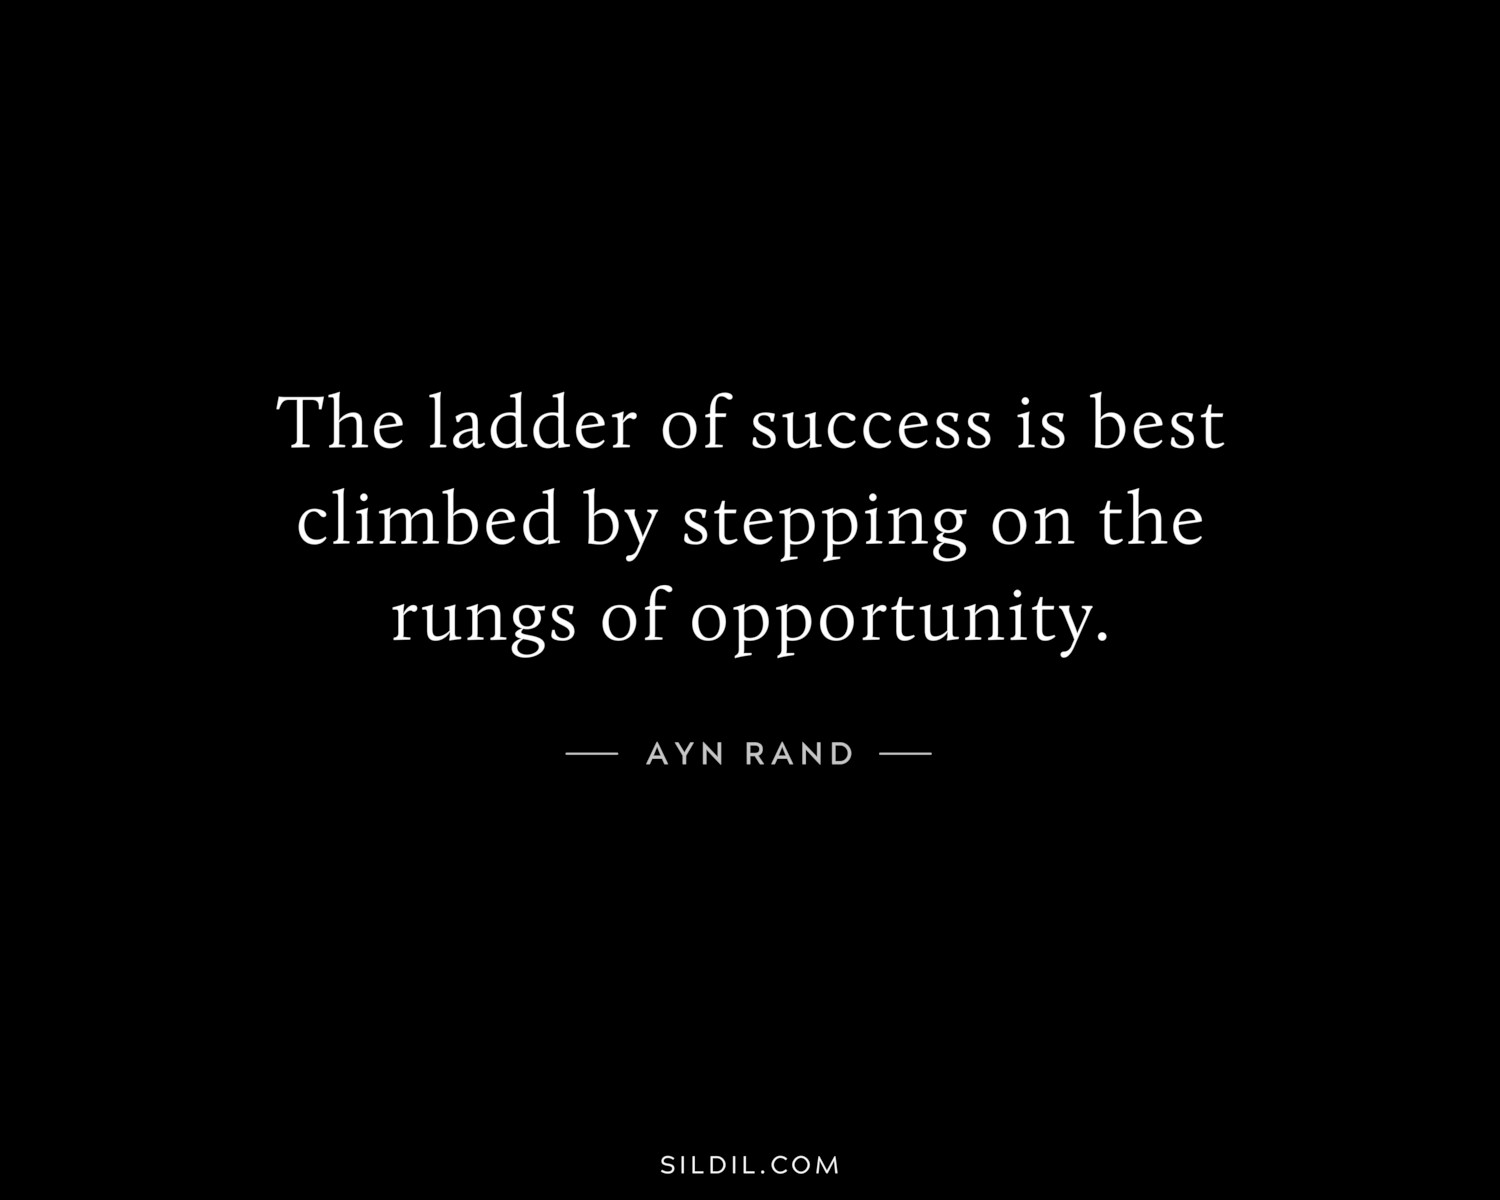 The ladder of success is best climbed by stepping on the rungs of opportunity.